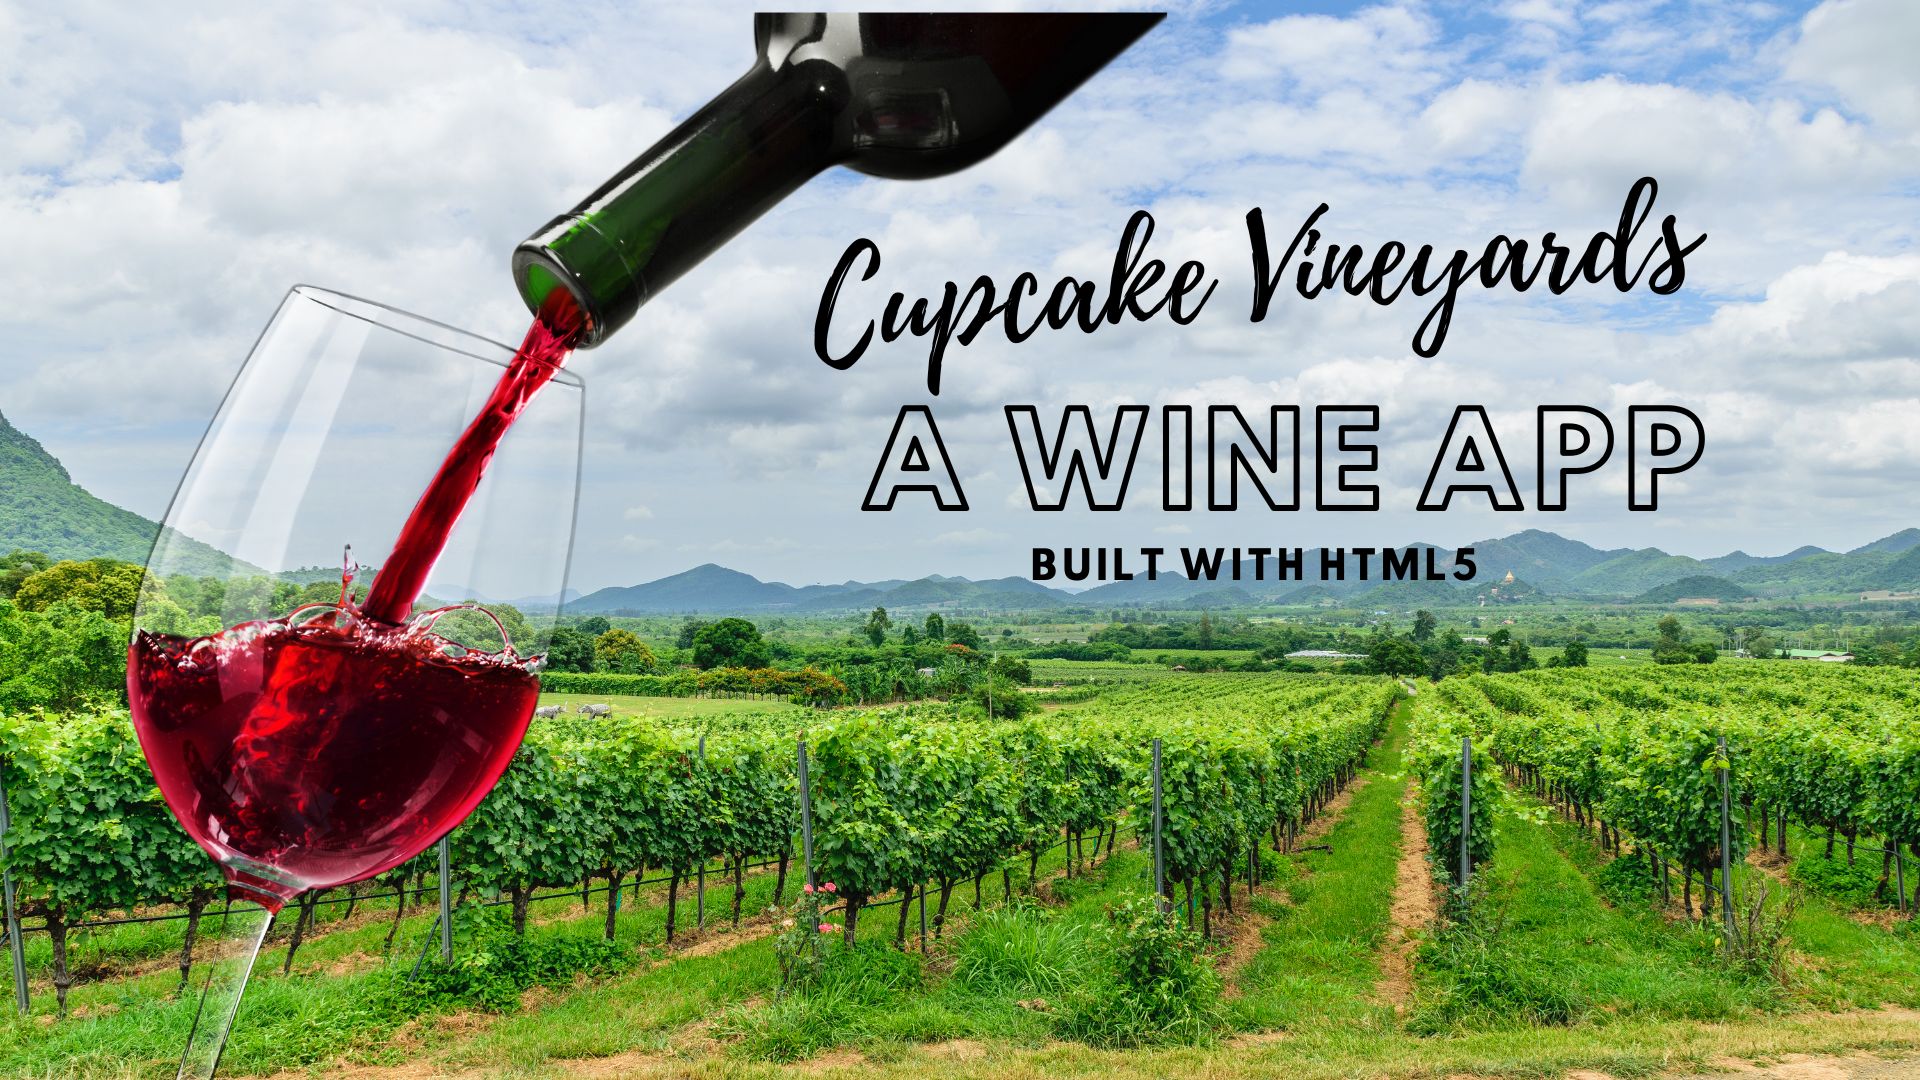 Cupcake Vineyards - a wine app built with HTML5